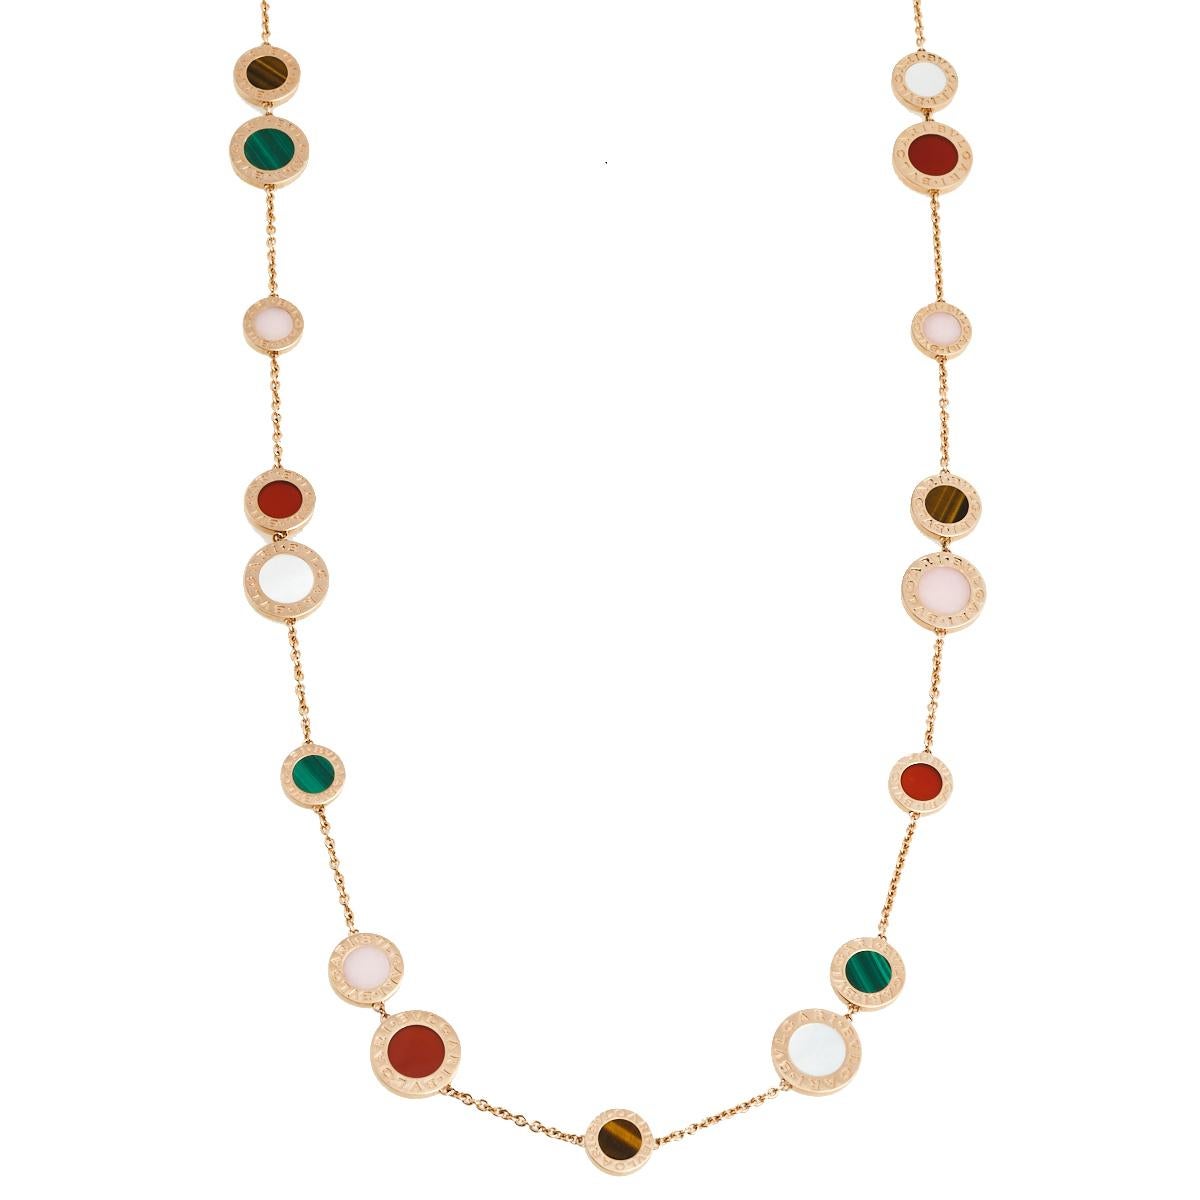 This Bvlgari necklace speaks beauty with its details. Crafted from 18k rose gold in a long silhouette, the necklace has multiple signature coin motifs inlaid with colorful gemstones like carnelian, malachite, mother of pearl, tiger's eye, and pink